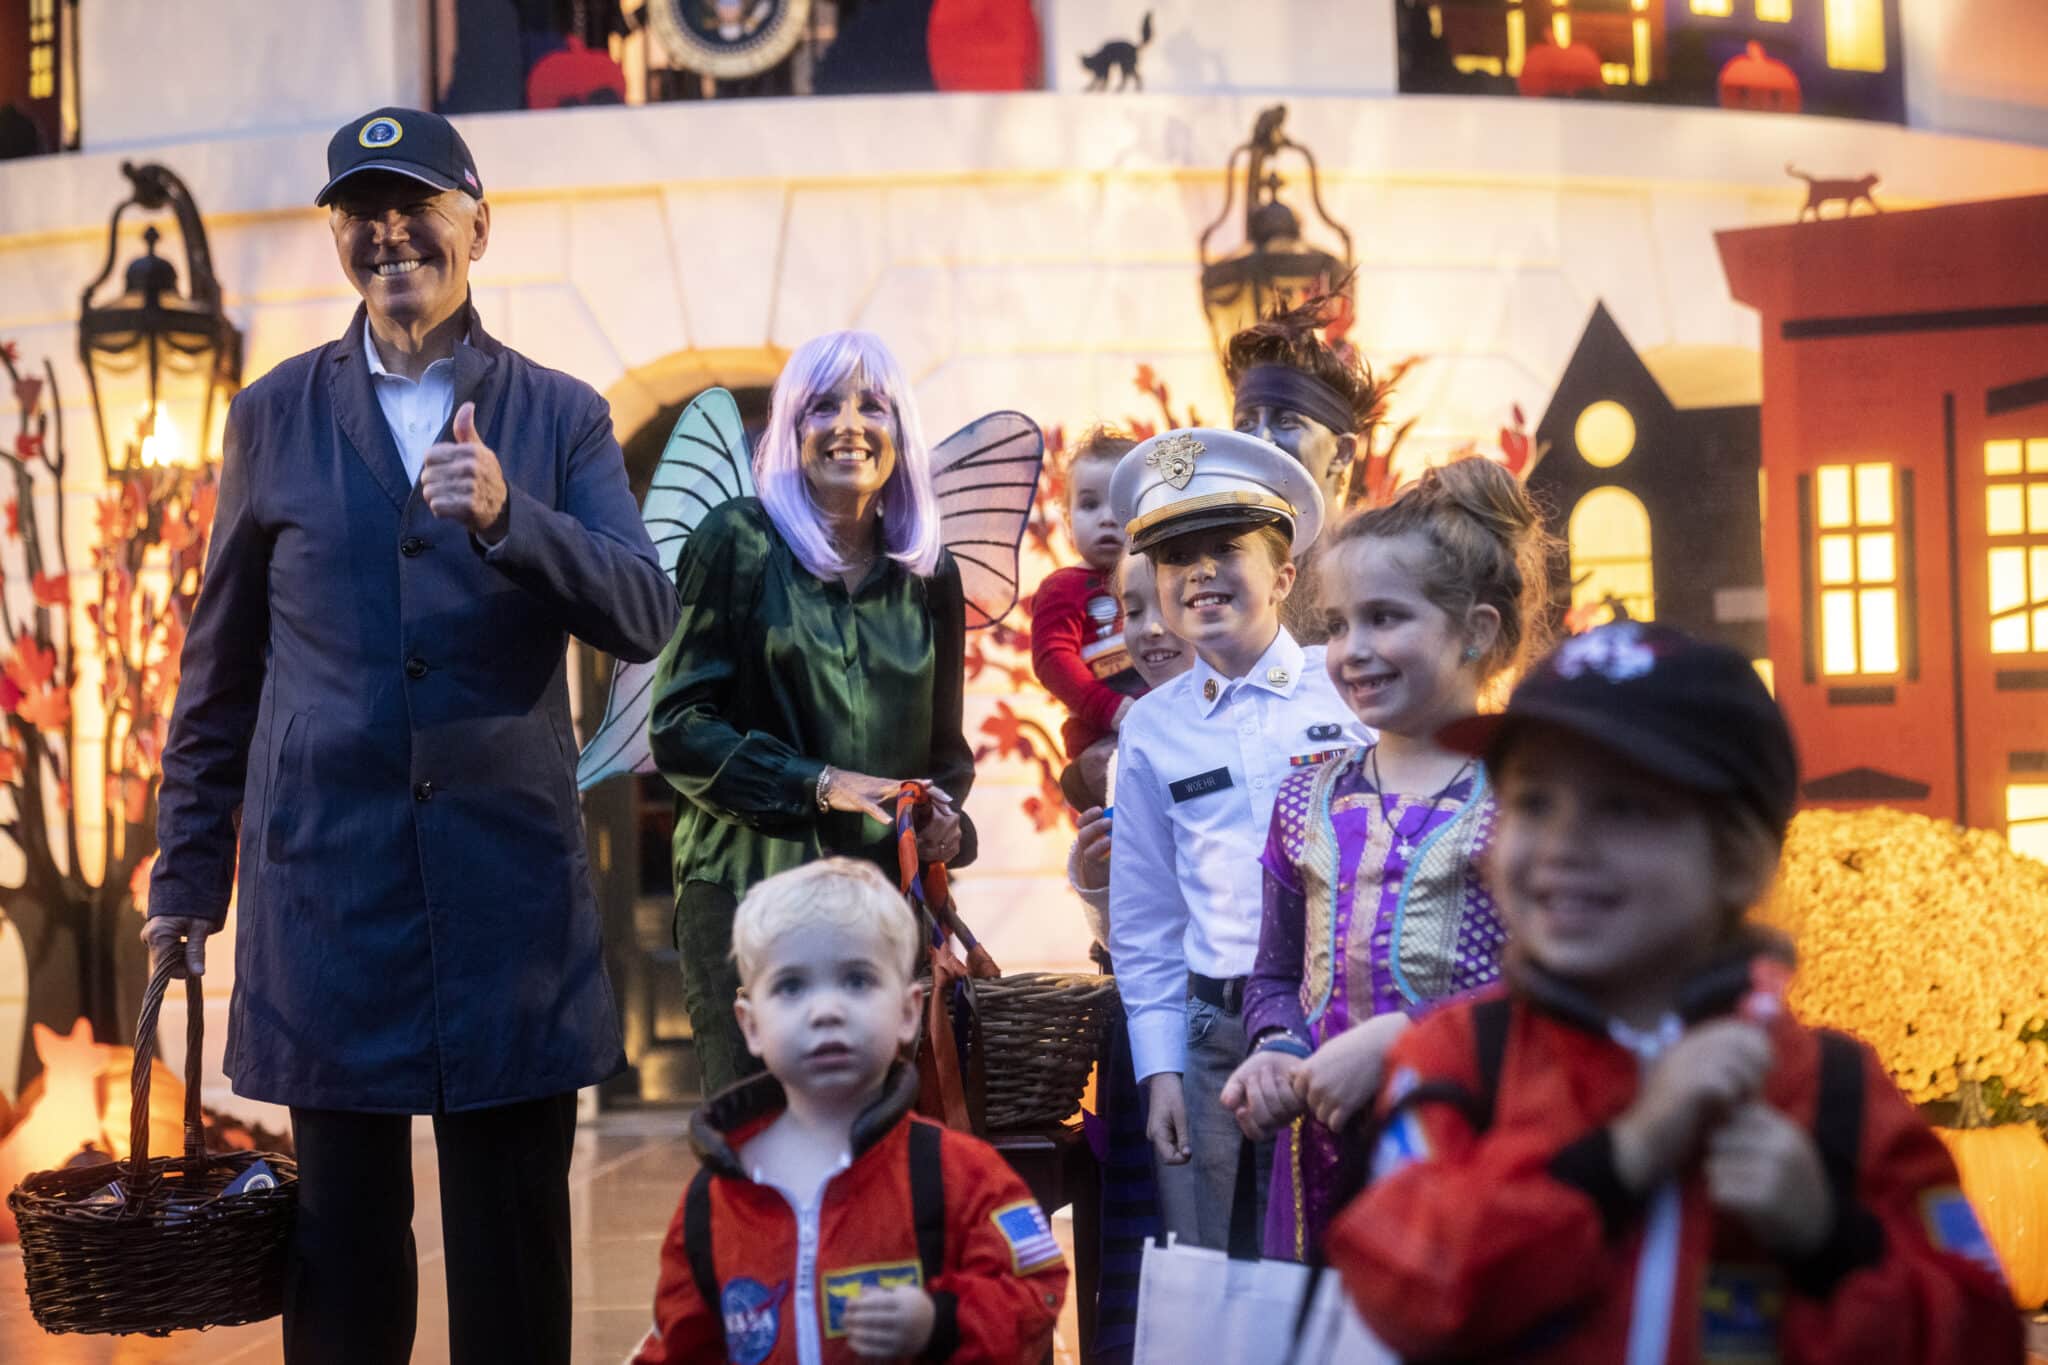 WASHINGTON, DC - OCTOBER 31: U.S. President Joe Biden and first lady Jill Biden greet trick-or-treaters during a Halloween event on the South Lawn of the White House October 31, 2022 in Washington, DC. The Bidens hosted the children of local firefighters, nurses, police officers and National Guard members. (Photo by Drew Angerer/Getty Images)